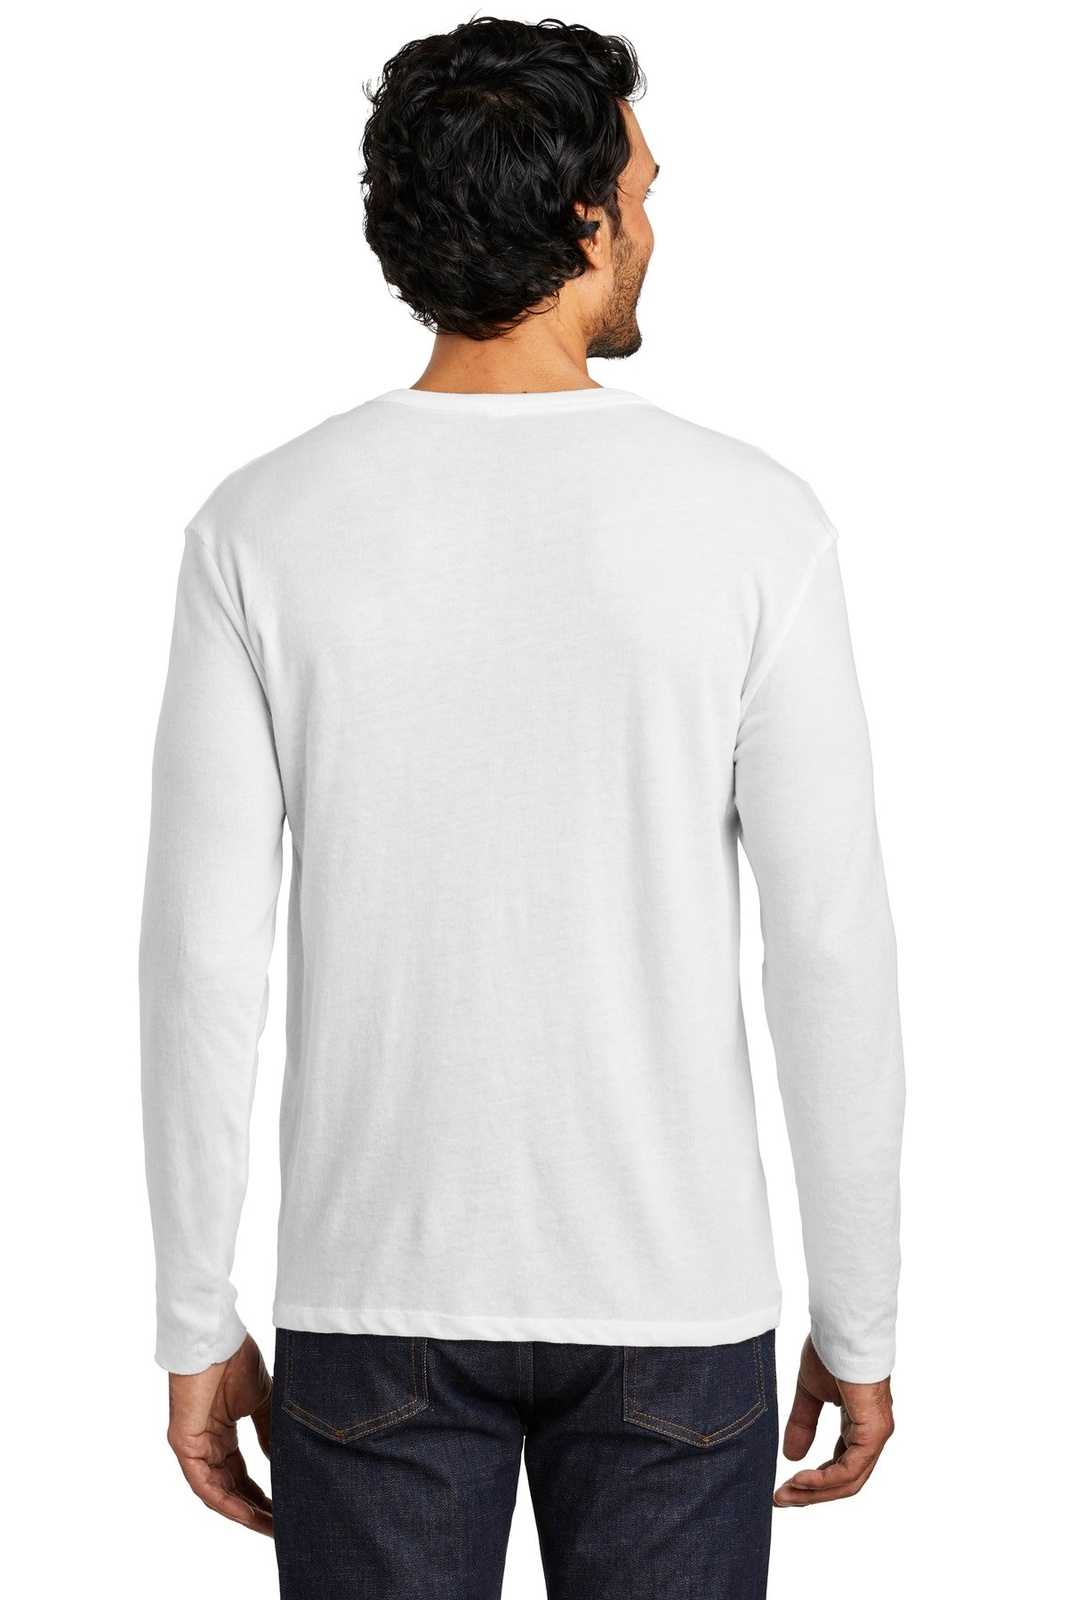 Alternative AA5100 The Keeper Vintage 50/50 Long Sleeve Tee - White - HIT a Double - 2